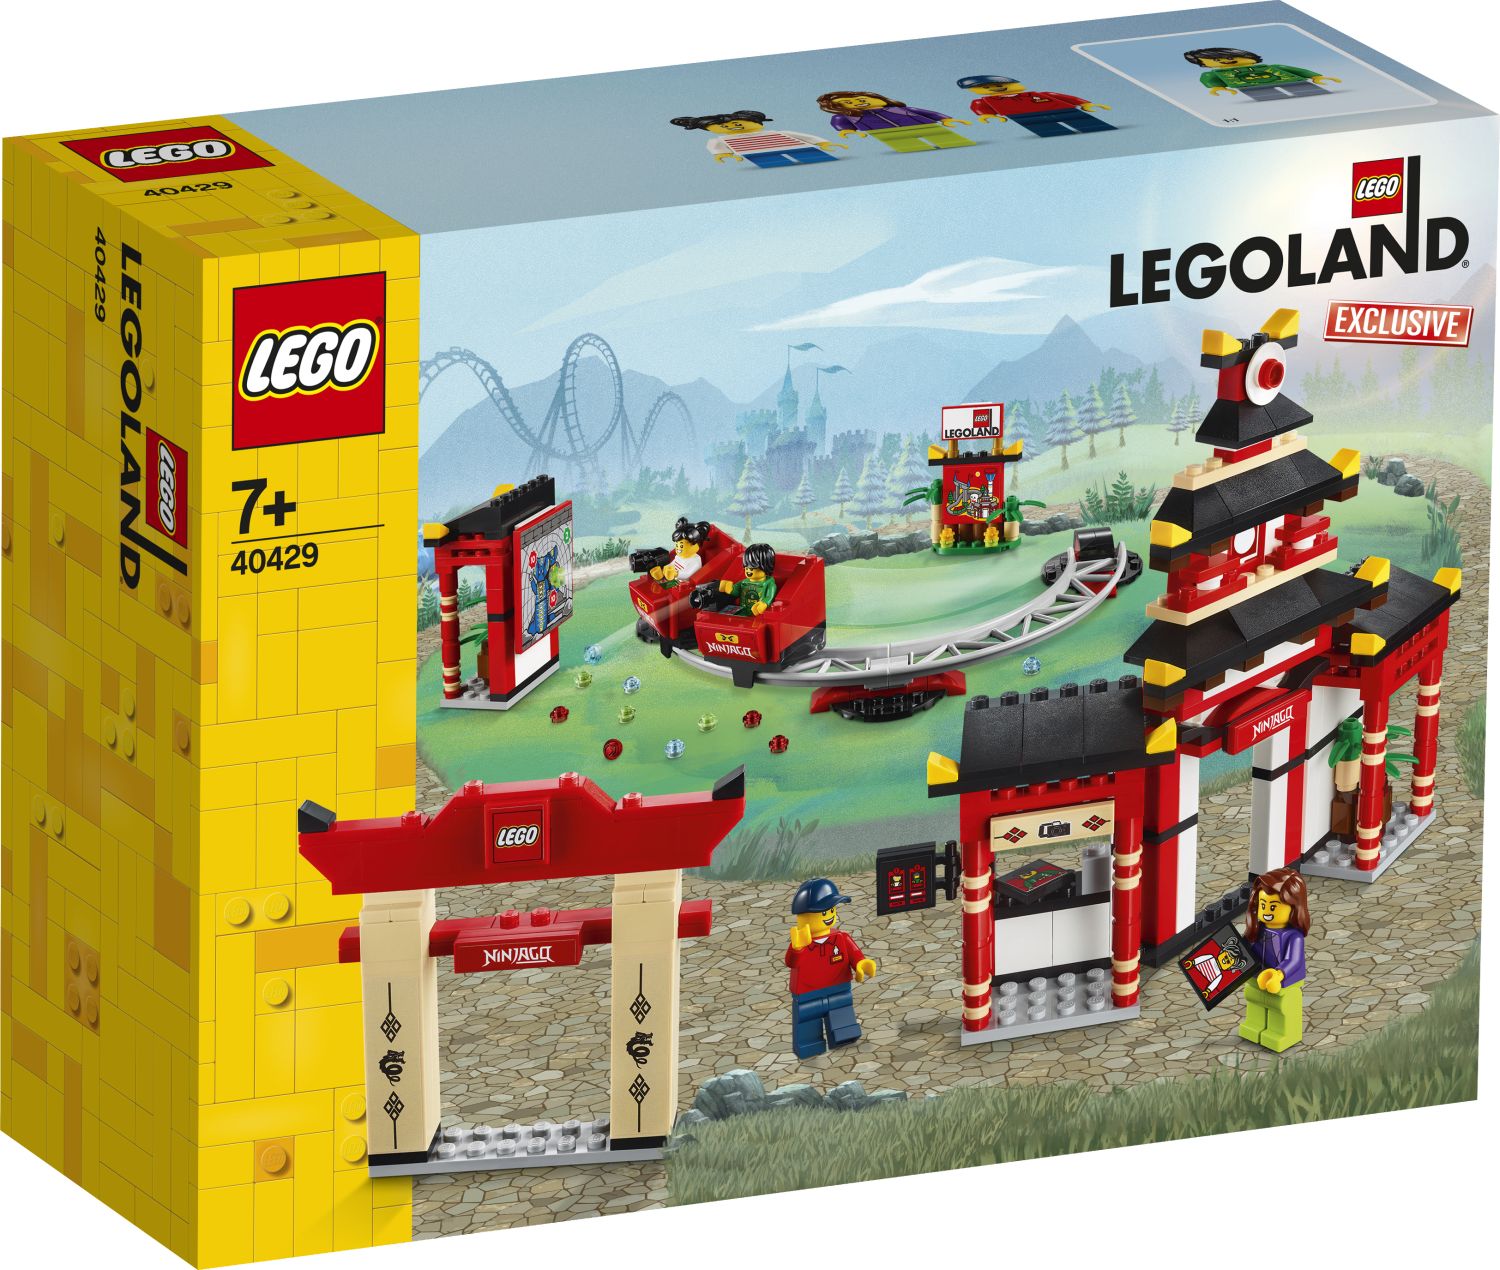 Target and the LEGO Group Expand Partnership with Limited-Edition